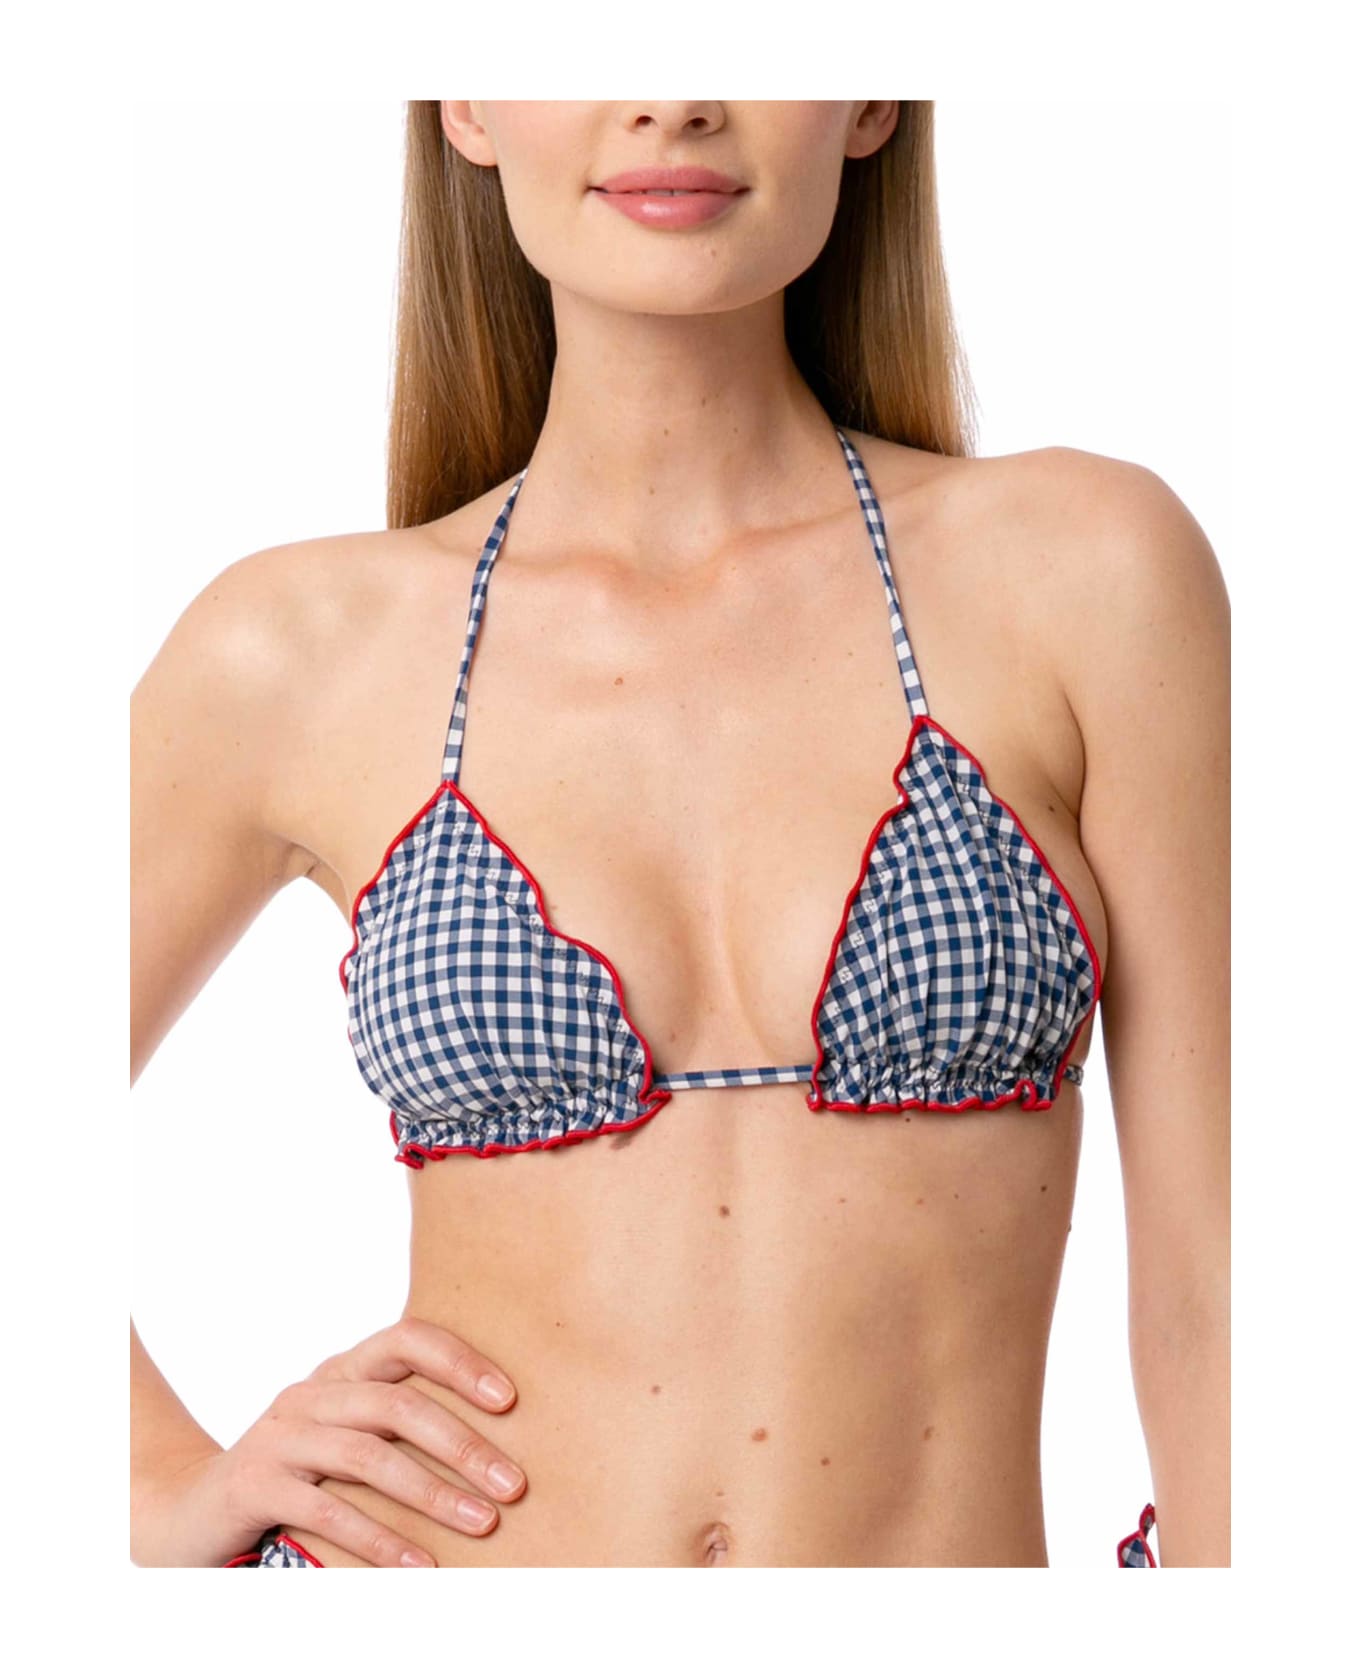 MC2 Saint Barth Woman Triangle Top Swimsuit With Gingham Print - BLUE